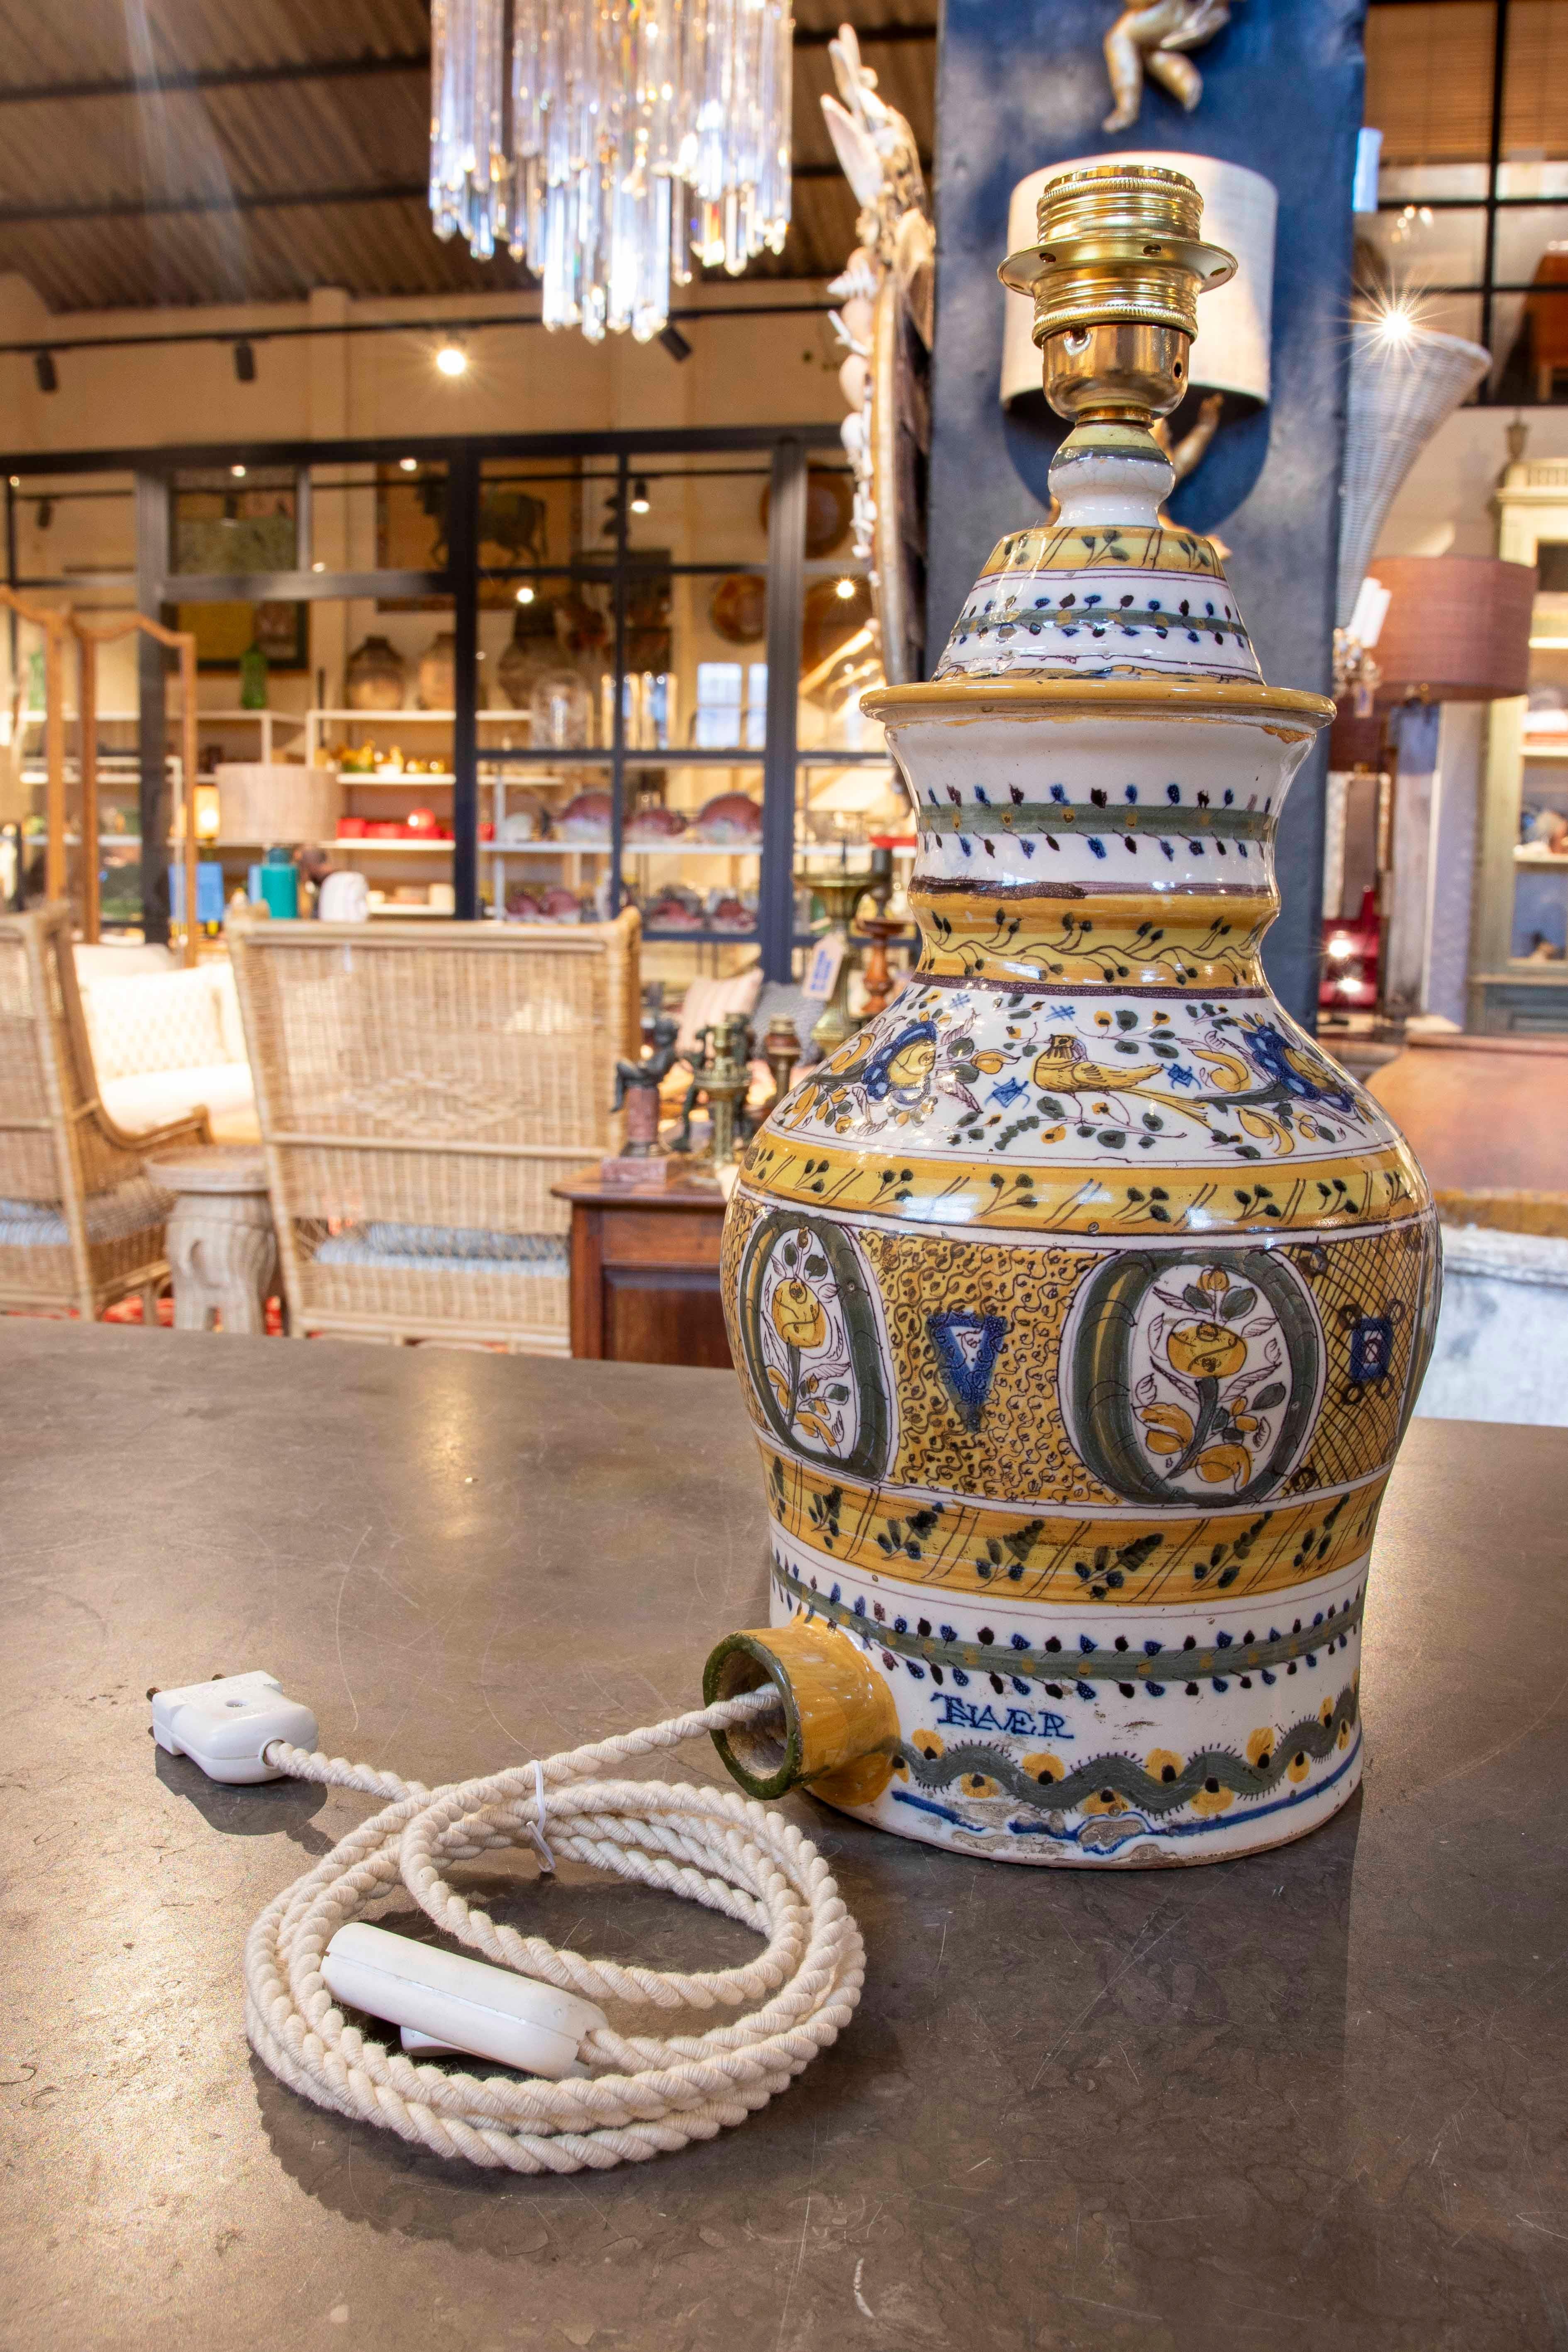 Ceramic 19th Century Spanish Talavera Pottery Turned into a Table Lamp For Sale